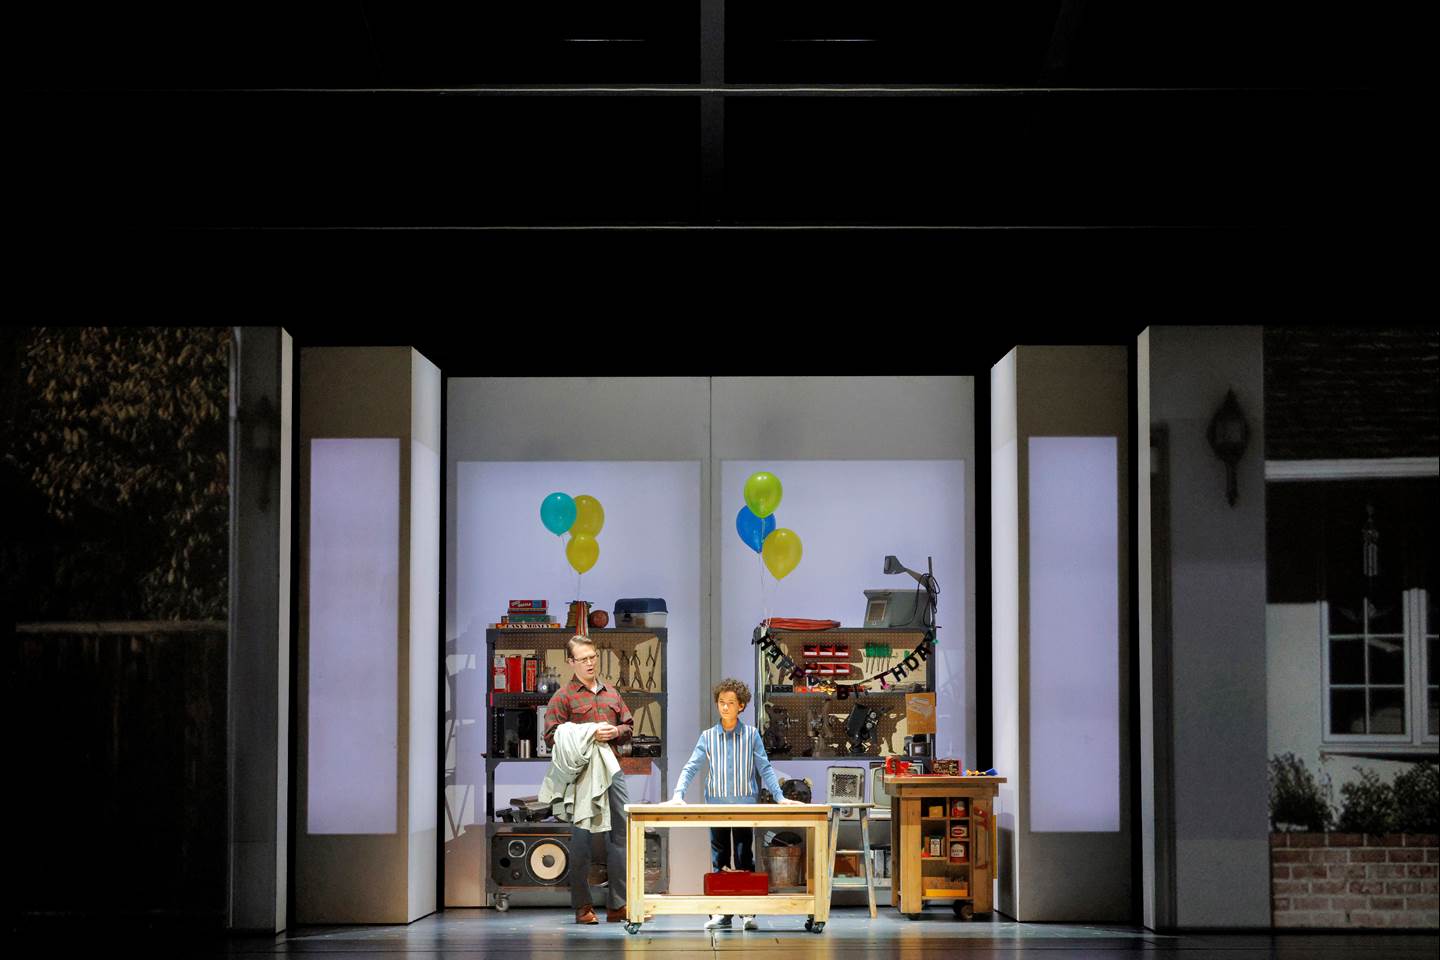 man and child on stage with a set that looks like a garage